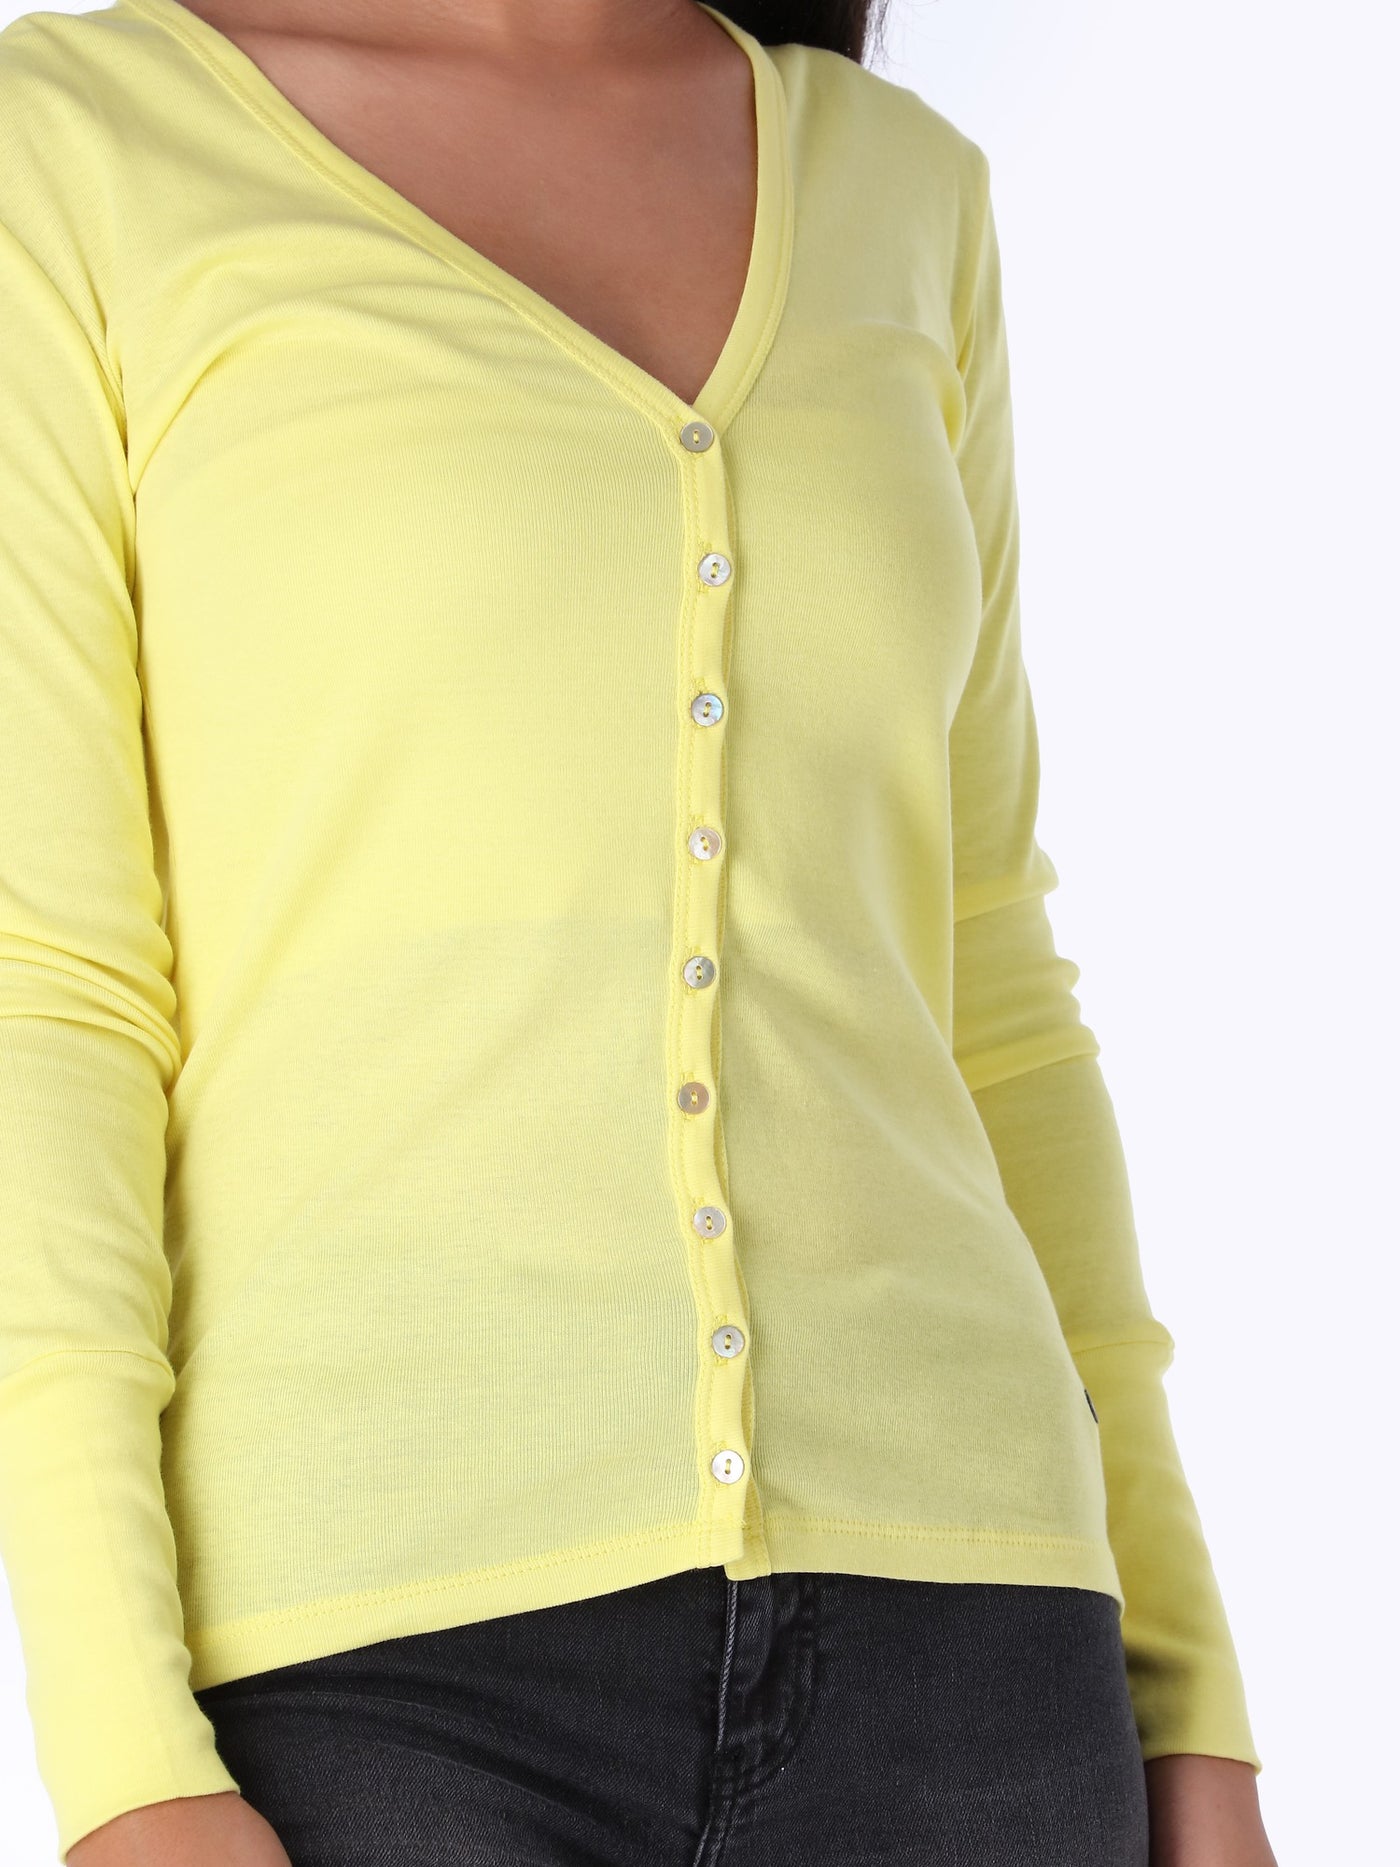  OR Women's V-Neck Button Down Cardigan